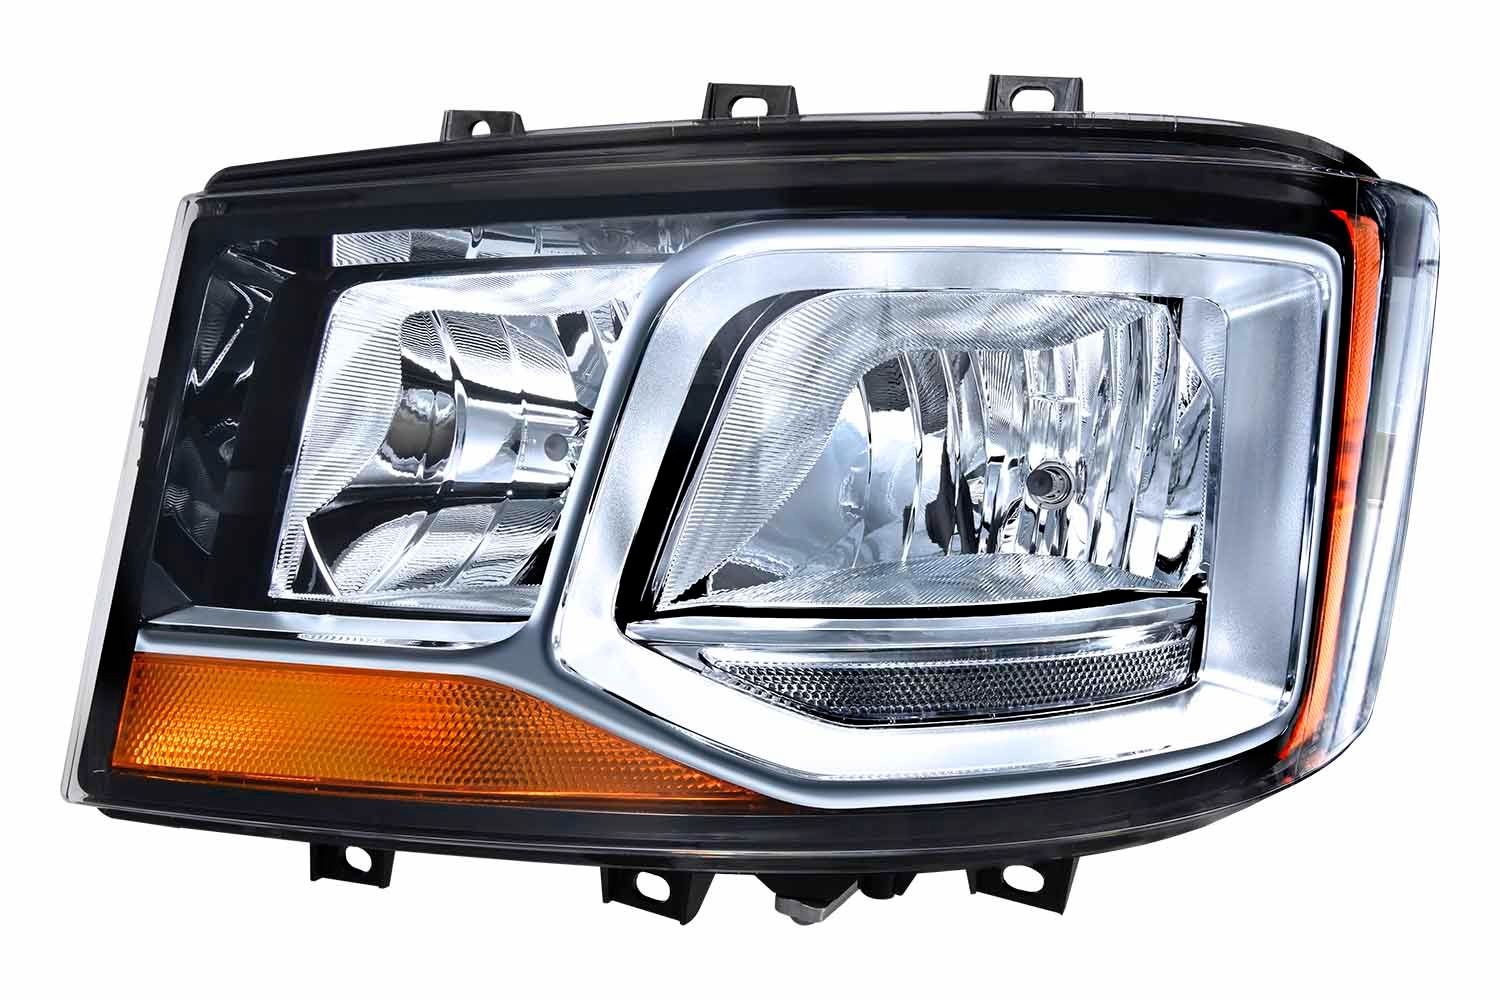 HELLA 1EH 011 804-051 Headlight Left, H7, Halogen, 24V, with low beam, with side marker light, with daytime running light (LED), with indicator, with high beam, with position light (LED), for right-hand traffic, with bulbs